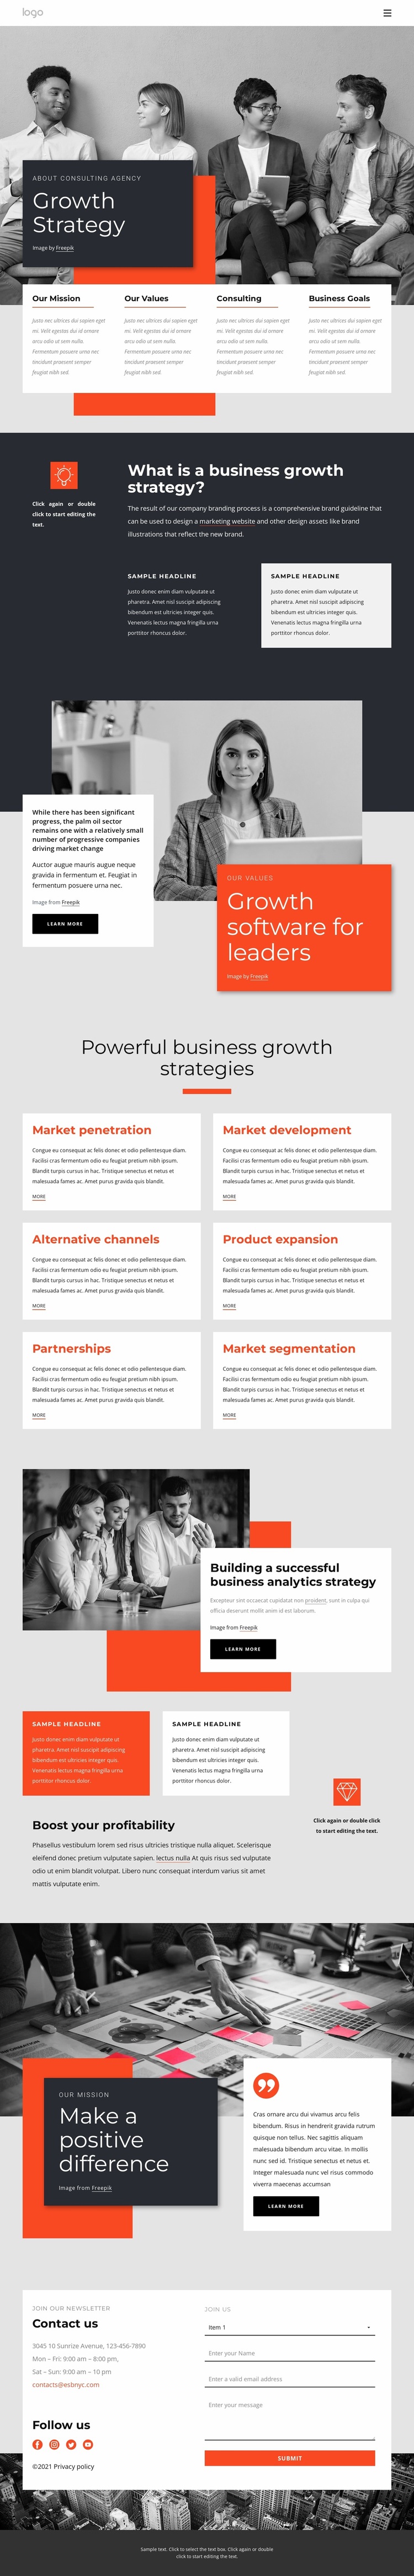 Growth strategy consultants Website Design